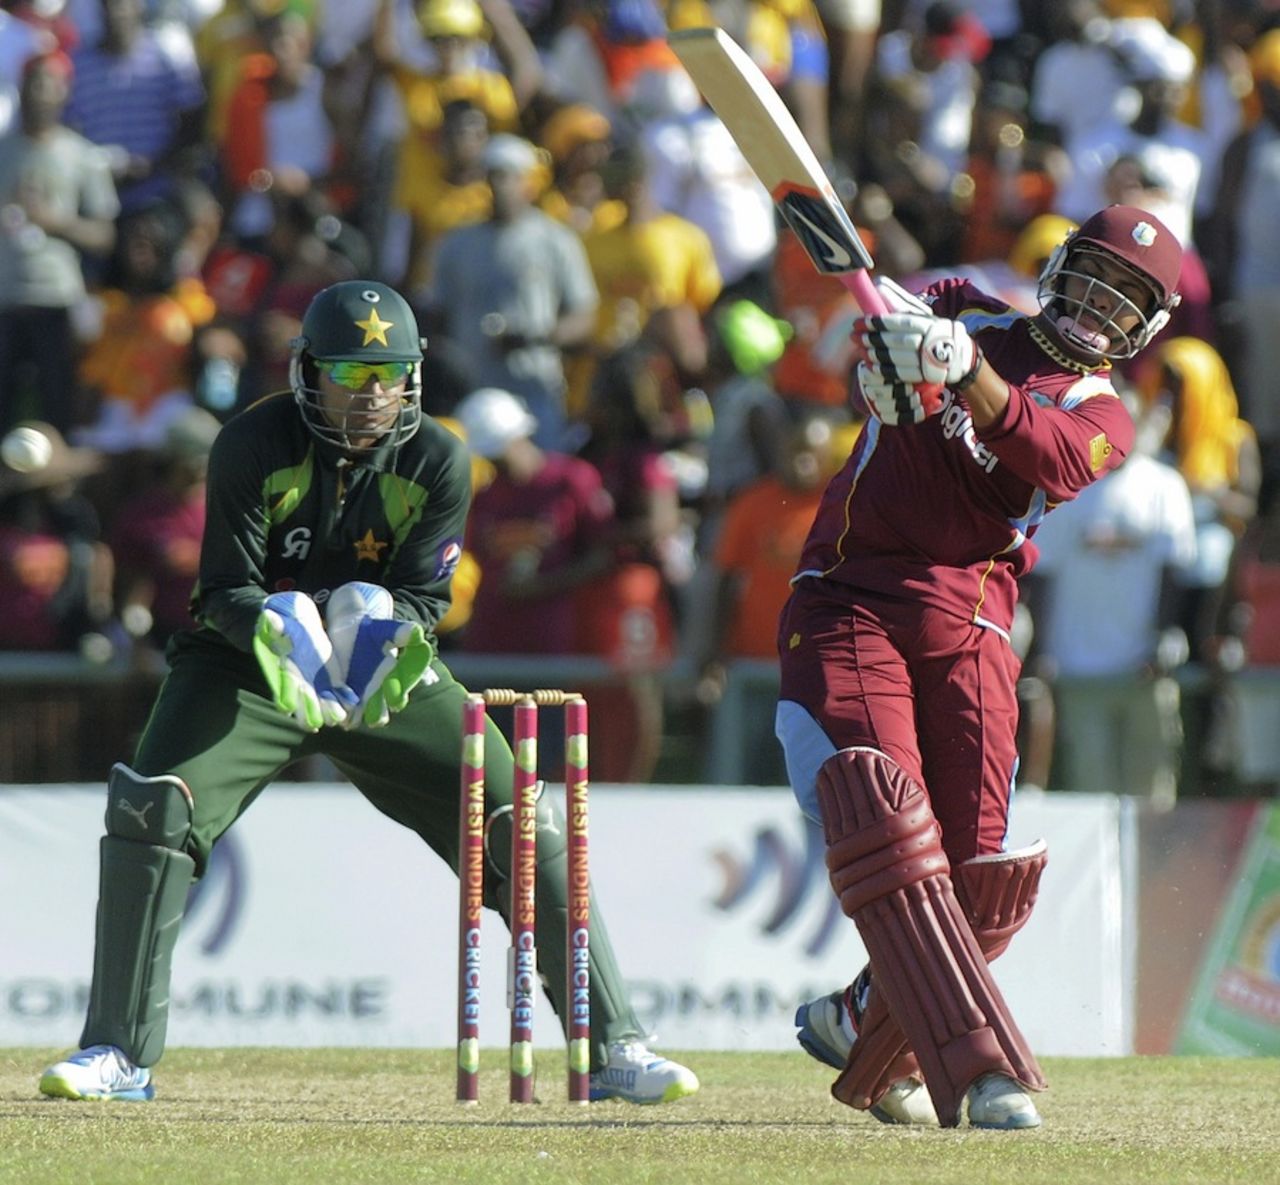 Sunil Narine throws his bat around, West Indies v Pakistan, 2nd T20I, St Vincent, July 28, 2013